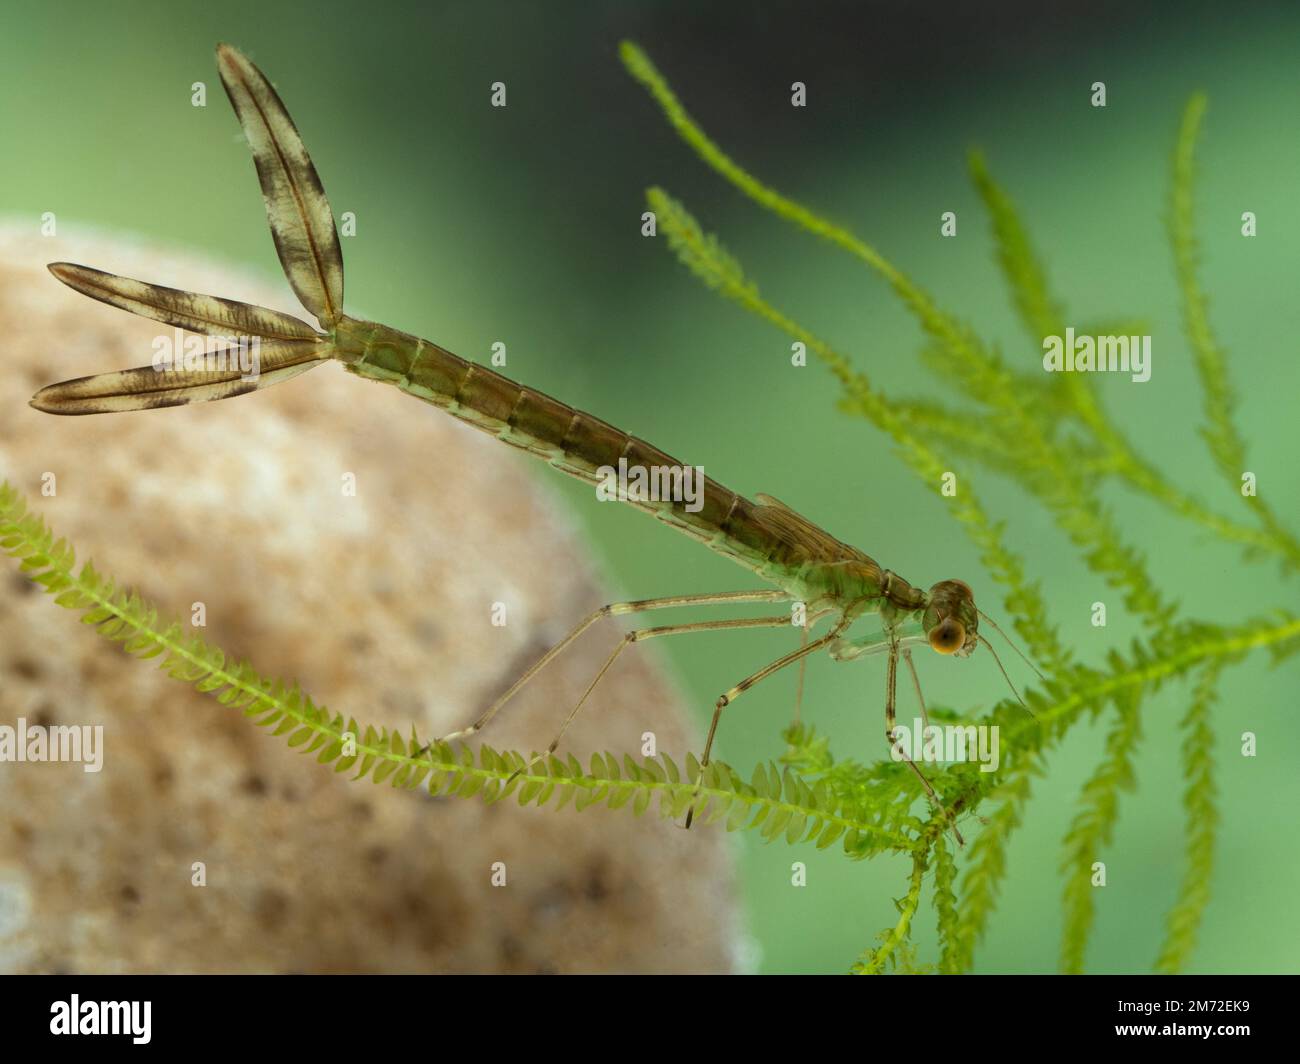 An aquatic damselfly nymph (or naiad) (Zygoptera species) underwater on a submerged plant Stock Photo